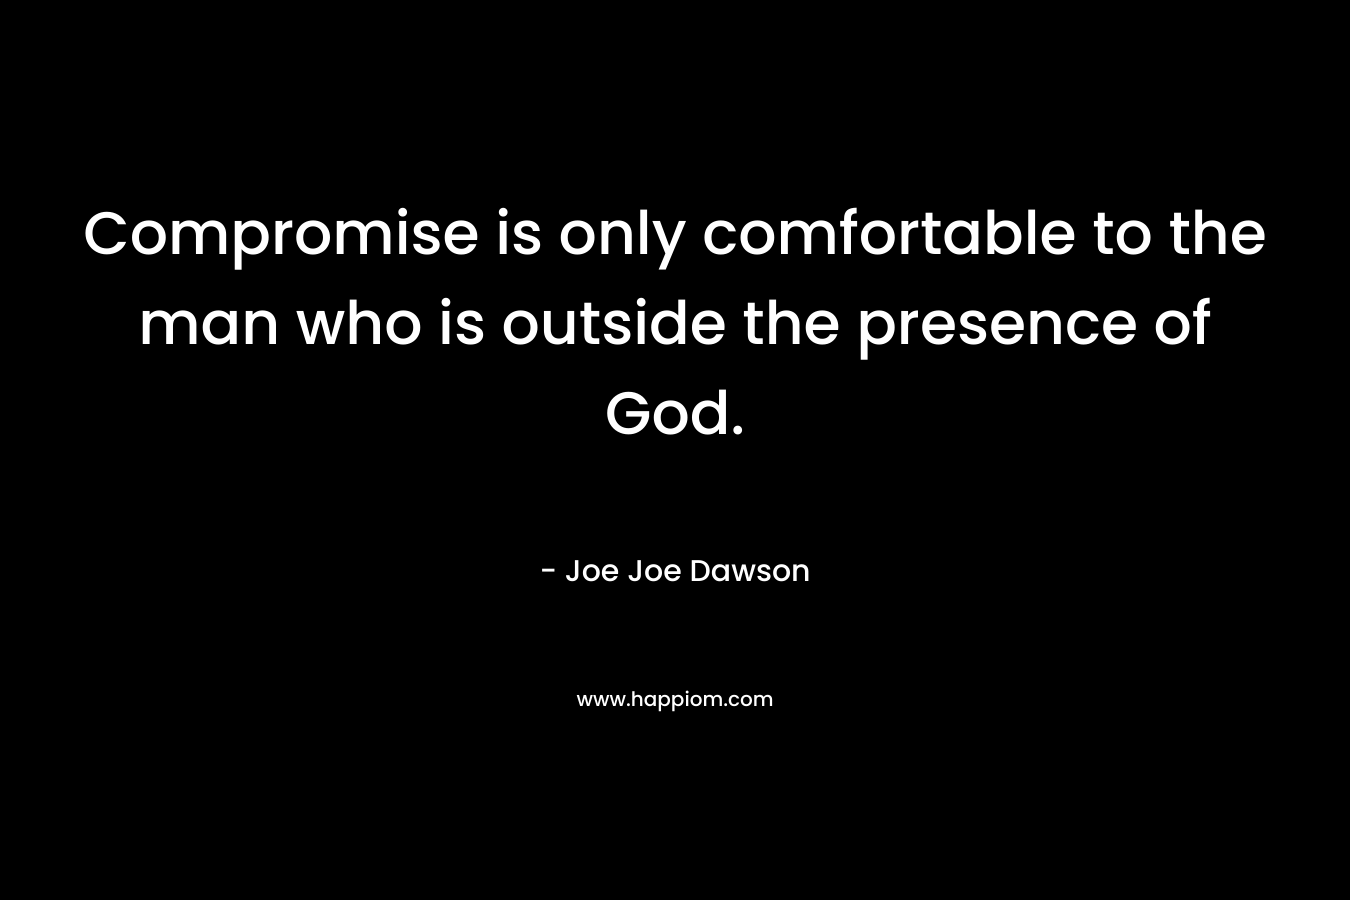 Compromise is only comfortable to the man who is outside the presence of God.